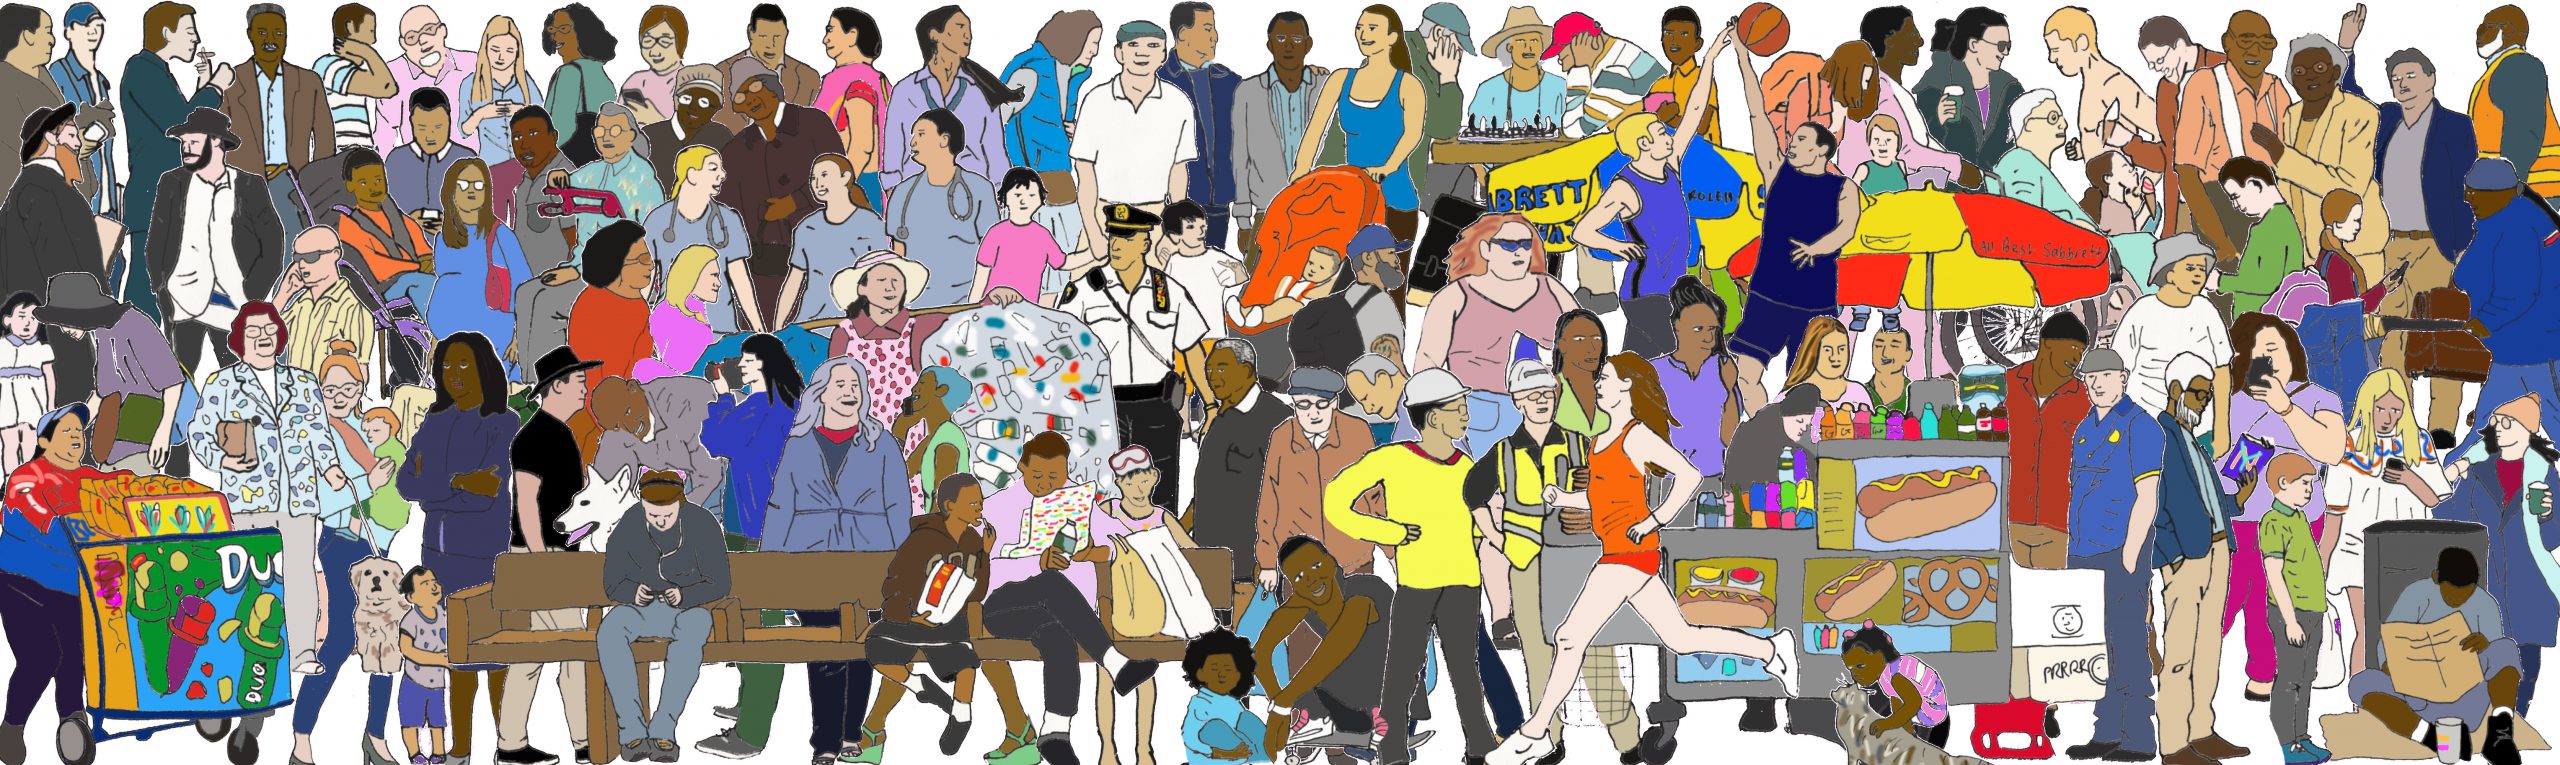 A colorful illustration of 100 characters drawn to visualize the diverse population of New York City